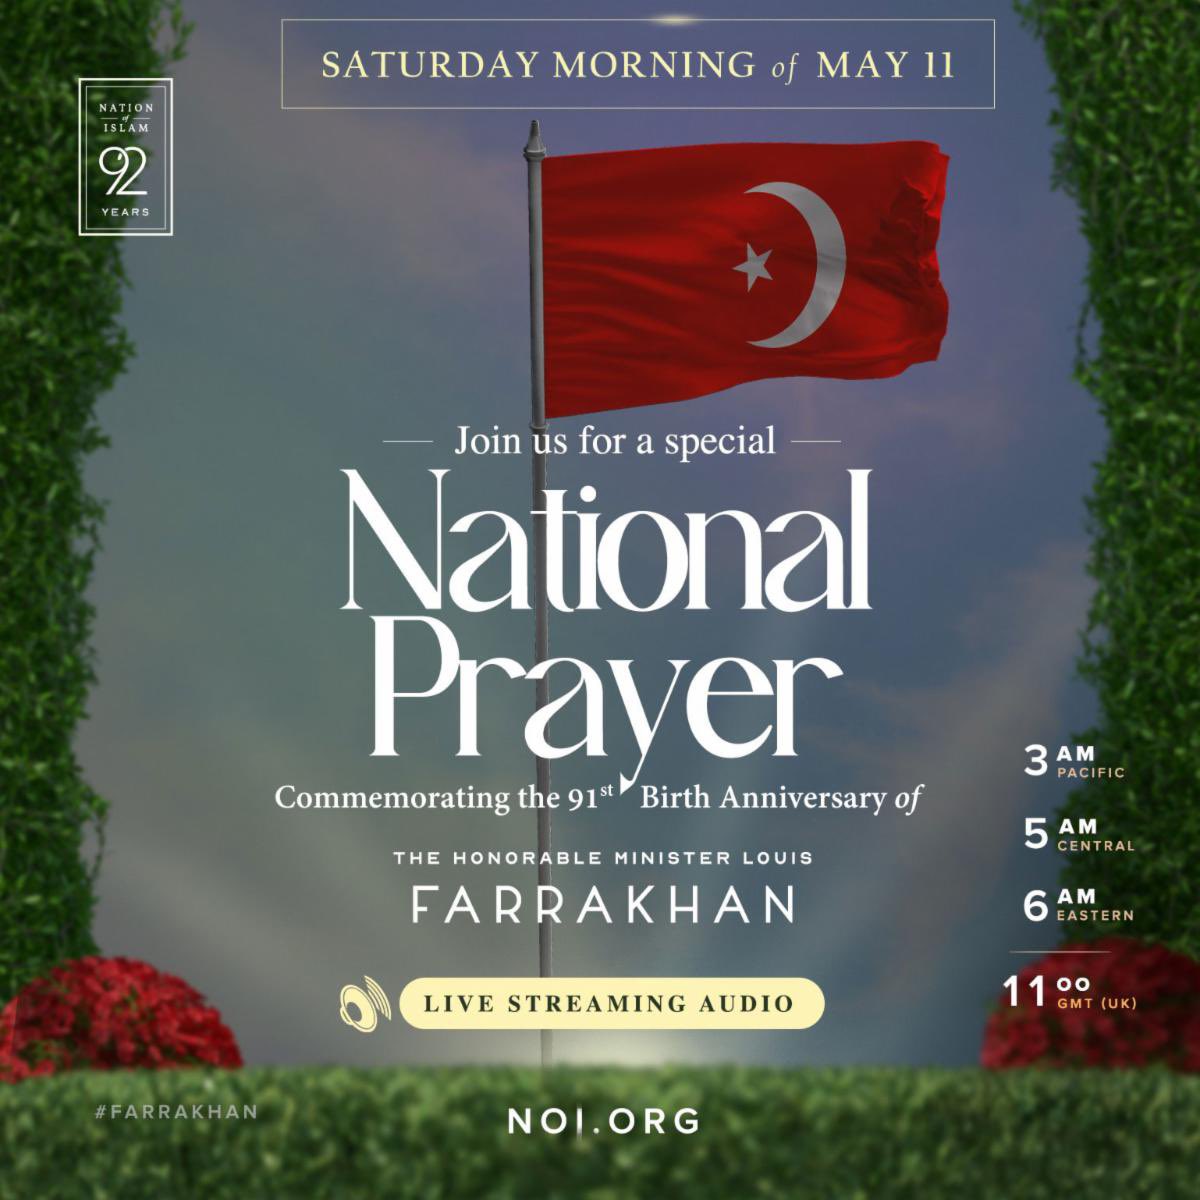 Join us Saturday, May 11, 2024 at 5:00AM CT for a special National Prayer commemorating the 91st Birth Anniversary of The Honorable Minister @LouisFarrakhan Listen Live @ noi.org #Farrakhan